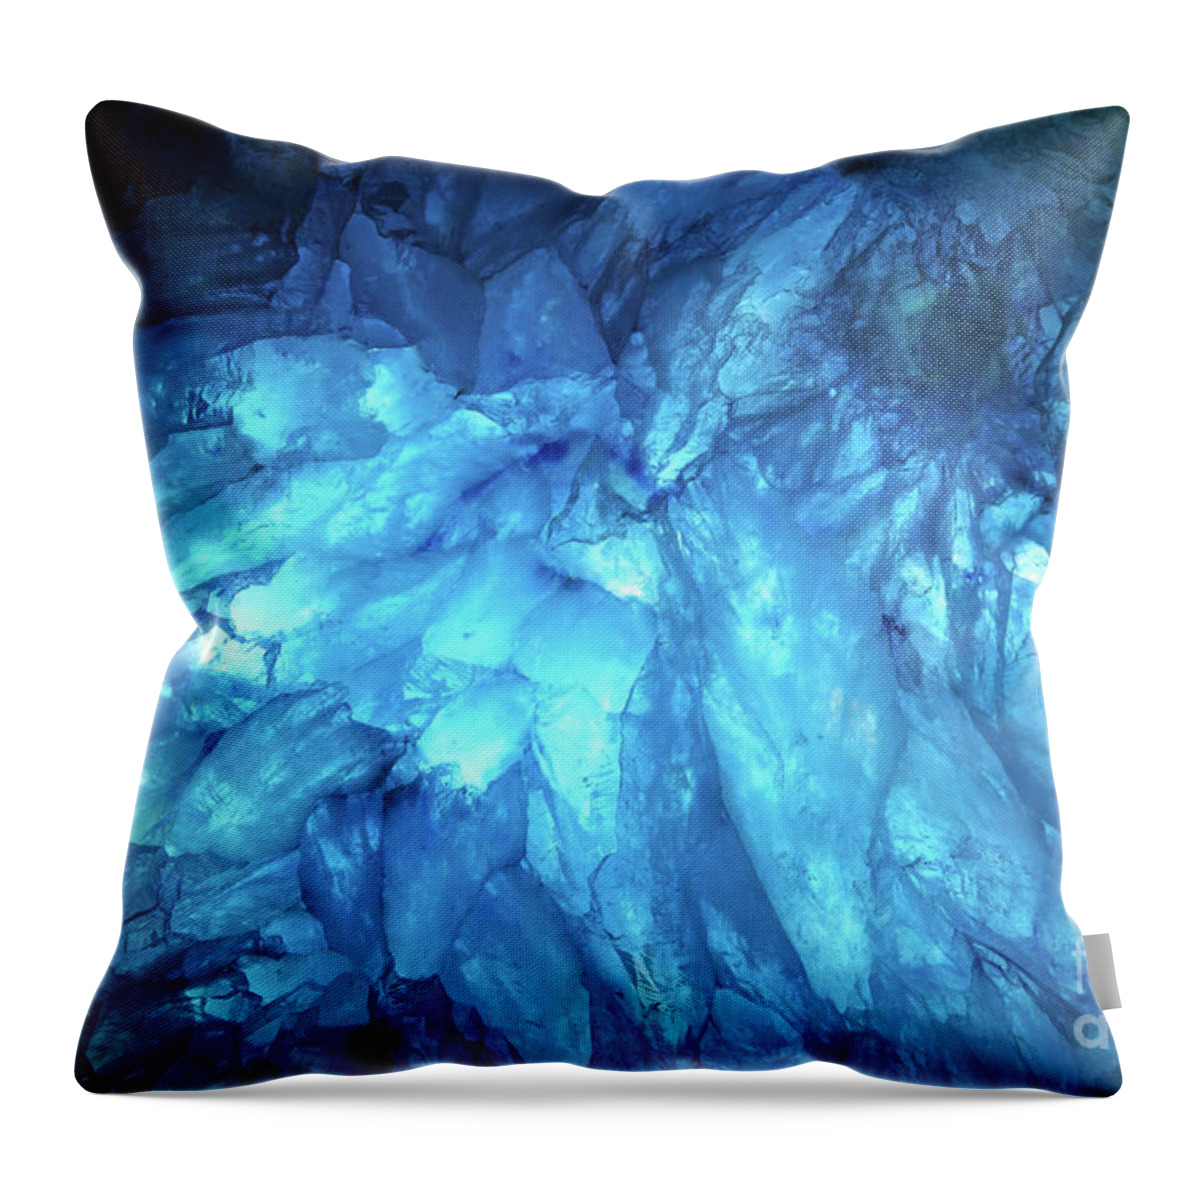 Blue Throw Pillow featuring the photograph Blue Agate by Nicholas Burningham